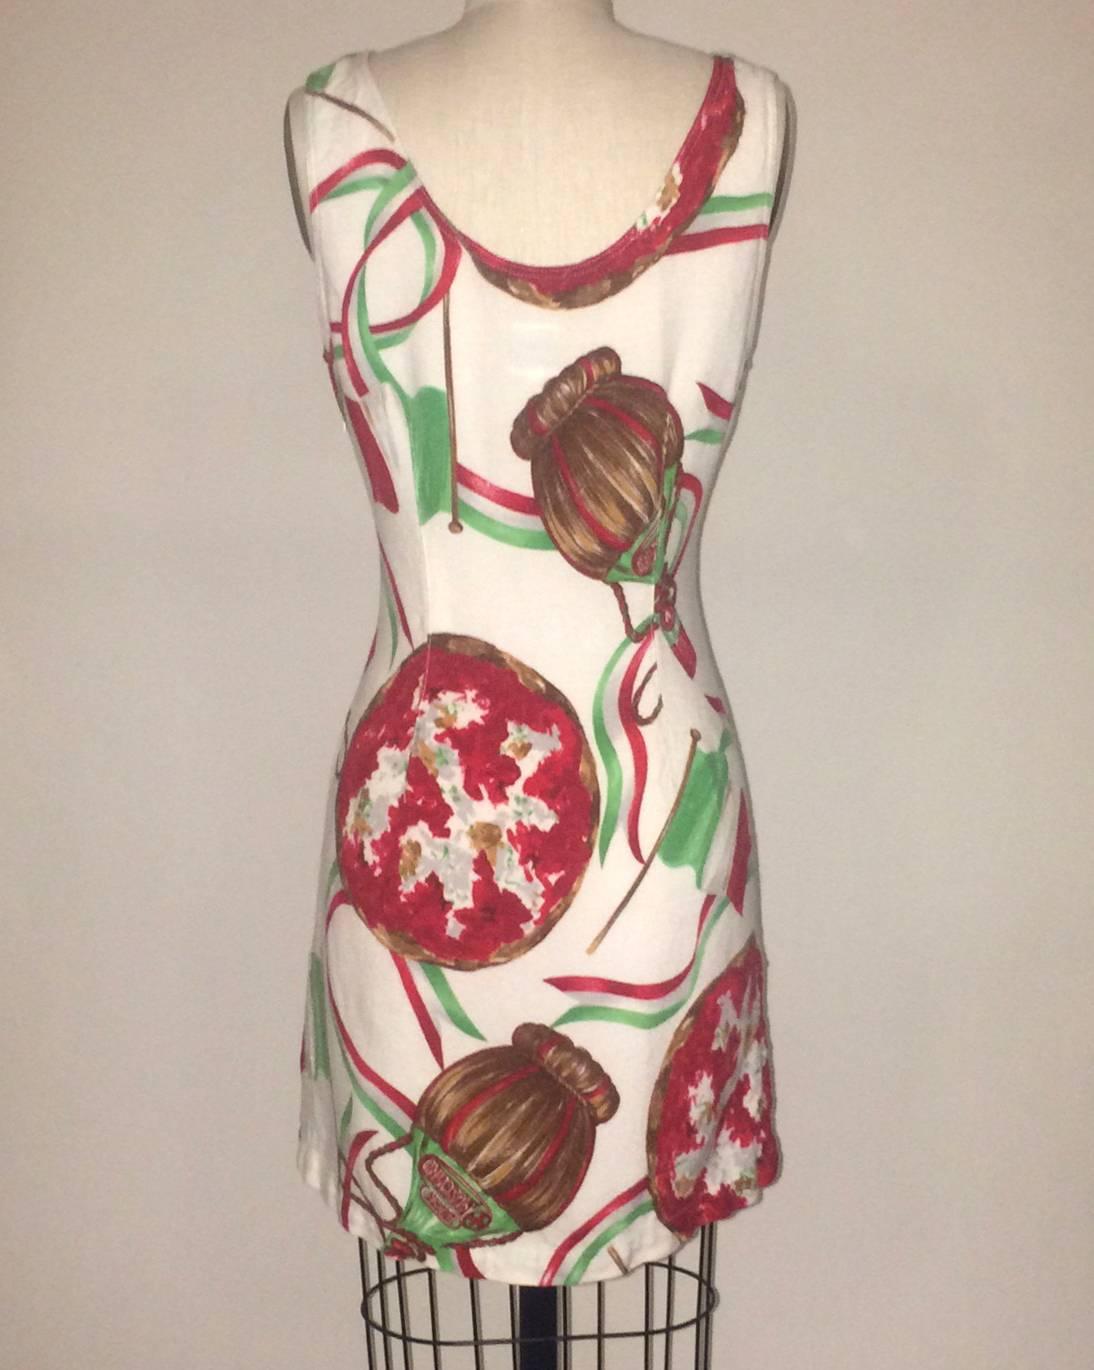 Moschino Jeans 1980s sleeveless scoop neck dress featuring pizzas, chianti wine, and Italian flags & streamers. Side zip. 

68% viscose 32% linen. 

Made in Italy.

Size IT 46, US 12. Fits more like modern 8. See measurements.
Bust